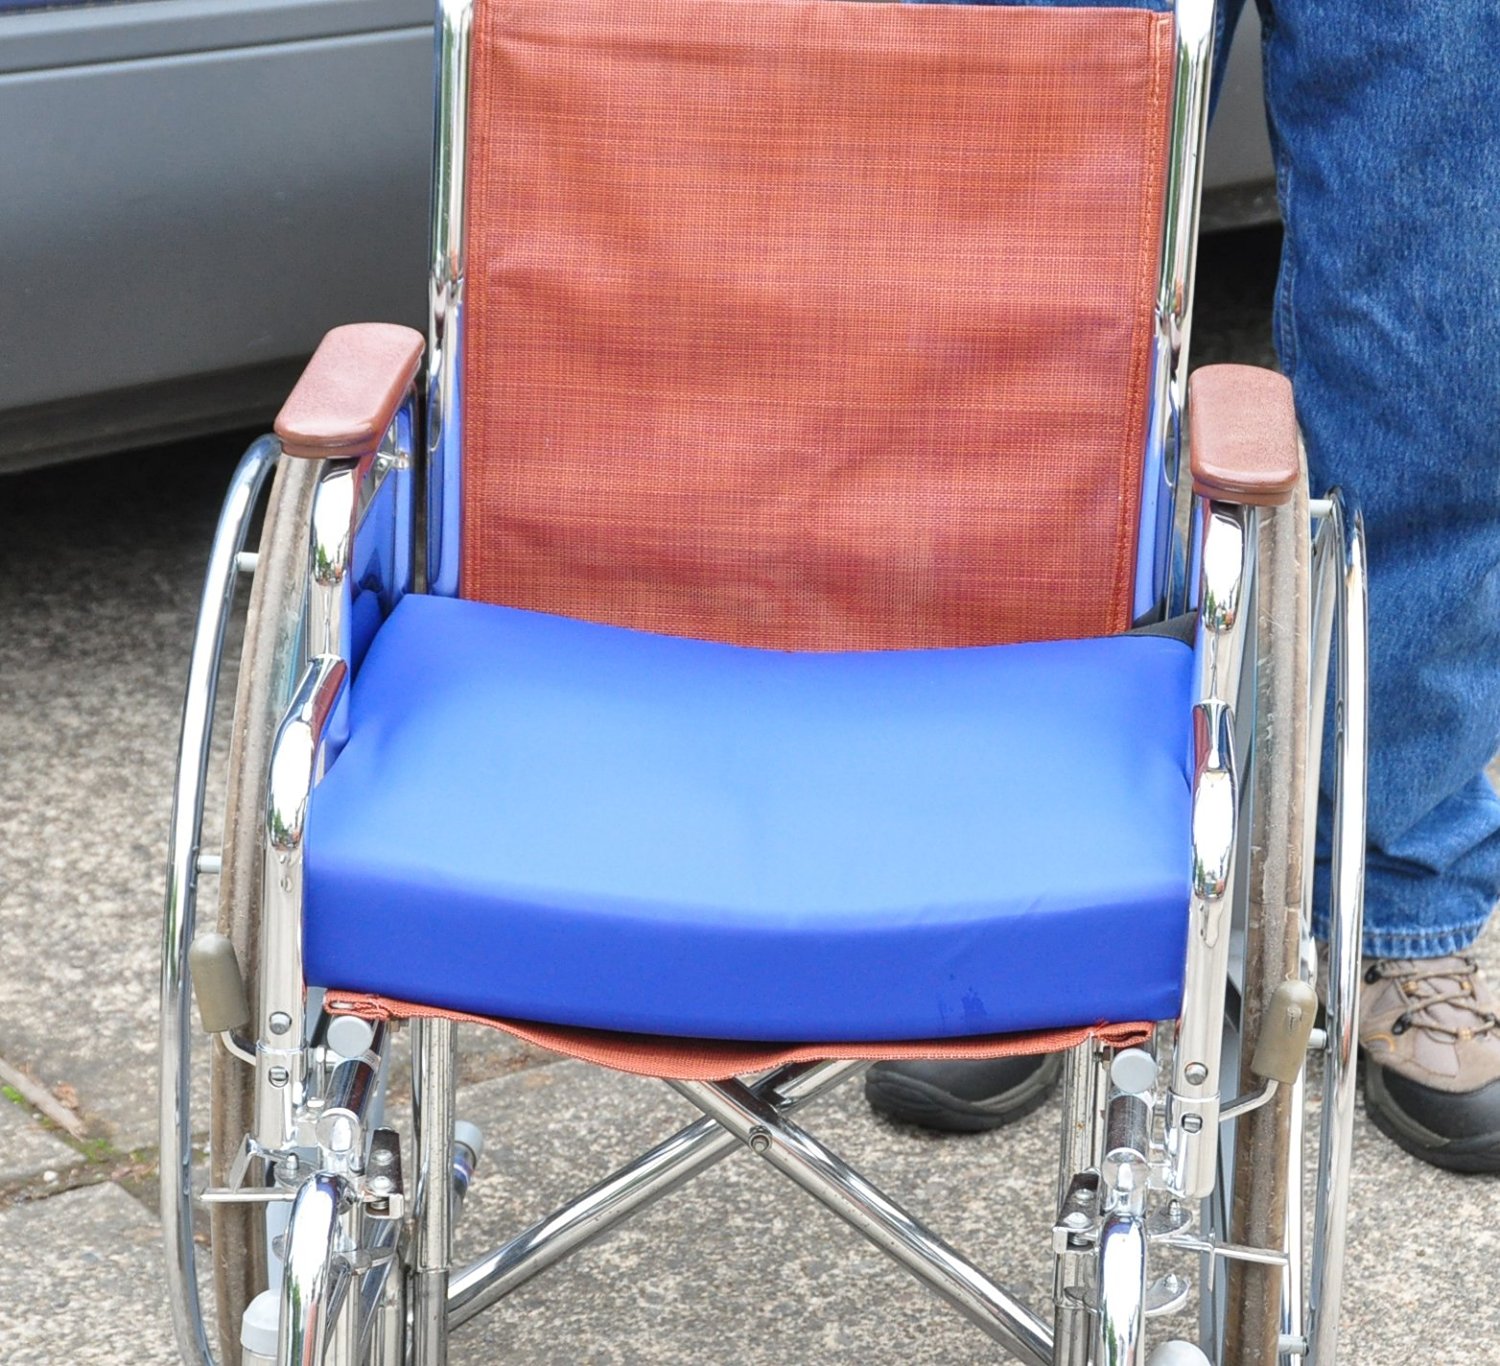 Best Cushions For Wheelchairs Reviews 2018 | Buying Guide